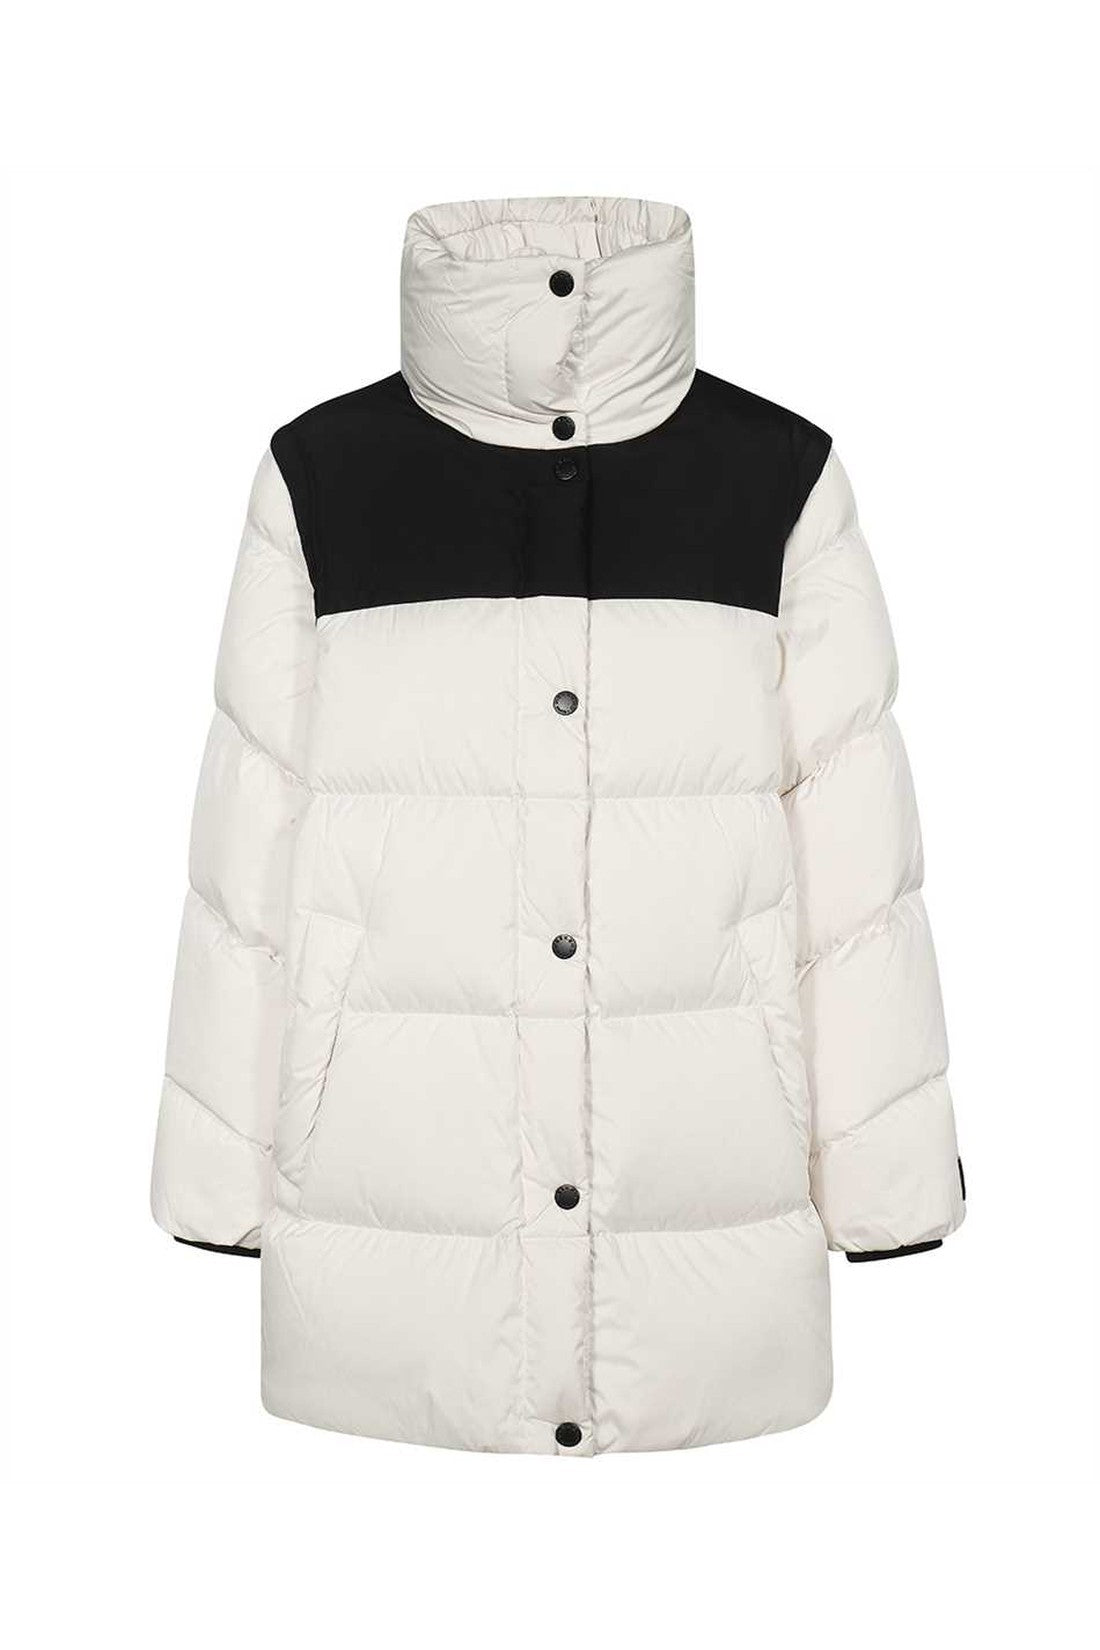 Long down jacket-Weekend Max Mara-OUTLET-SALE-30-ARCHIVIST